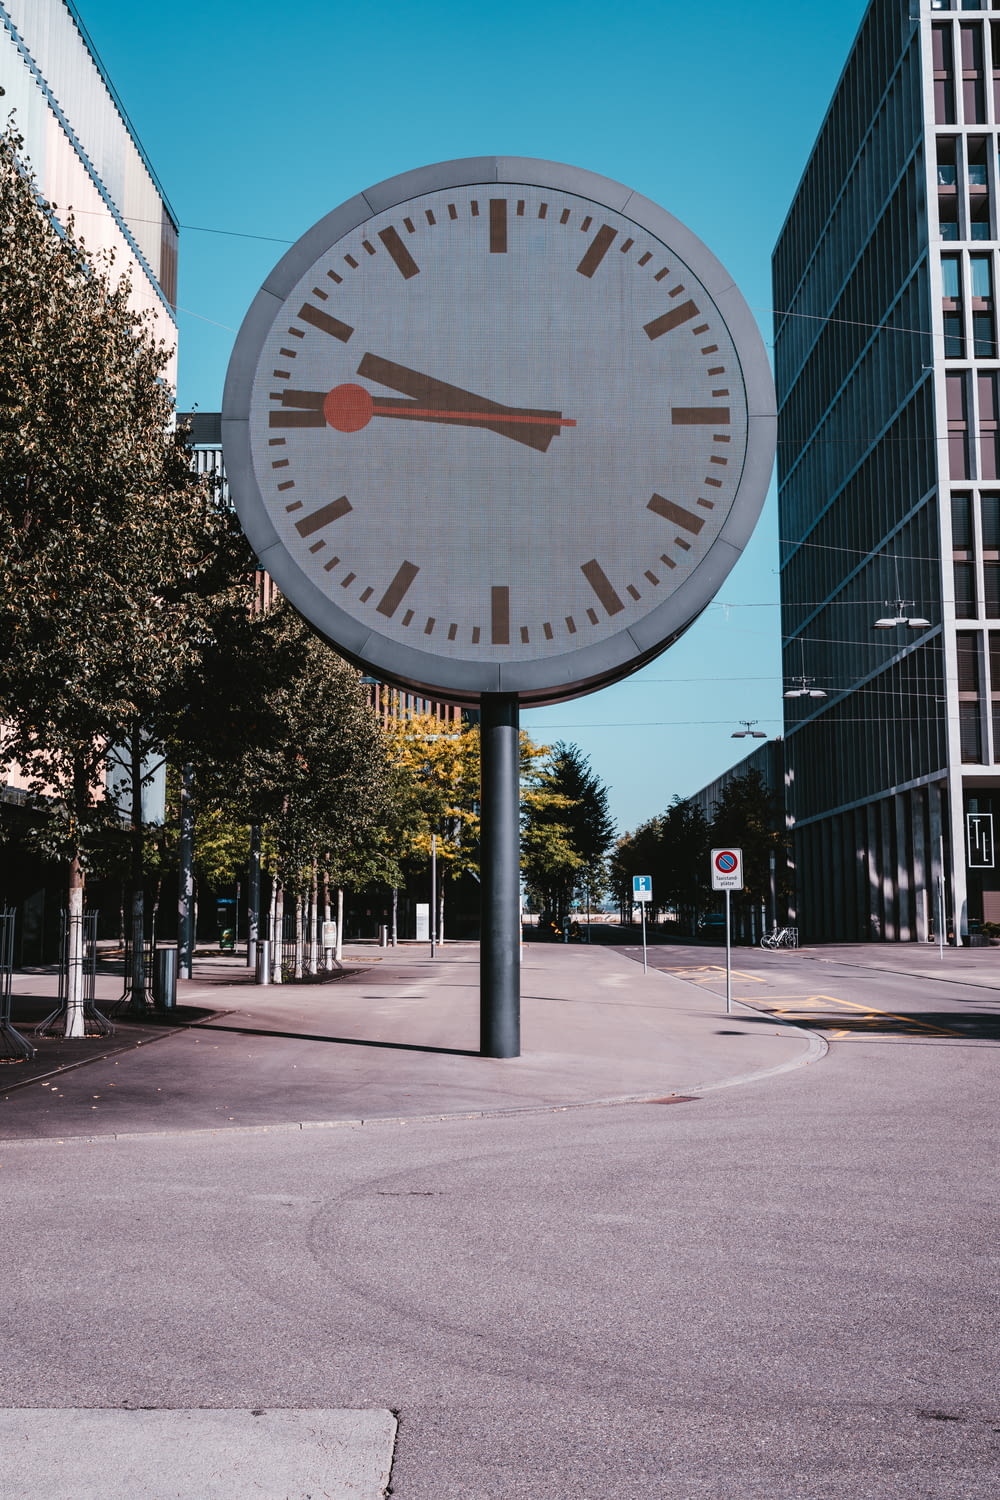 a large clock on a pole in the middle of a street